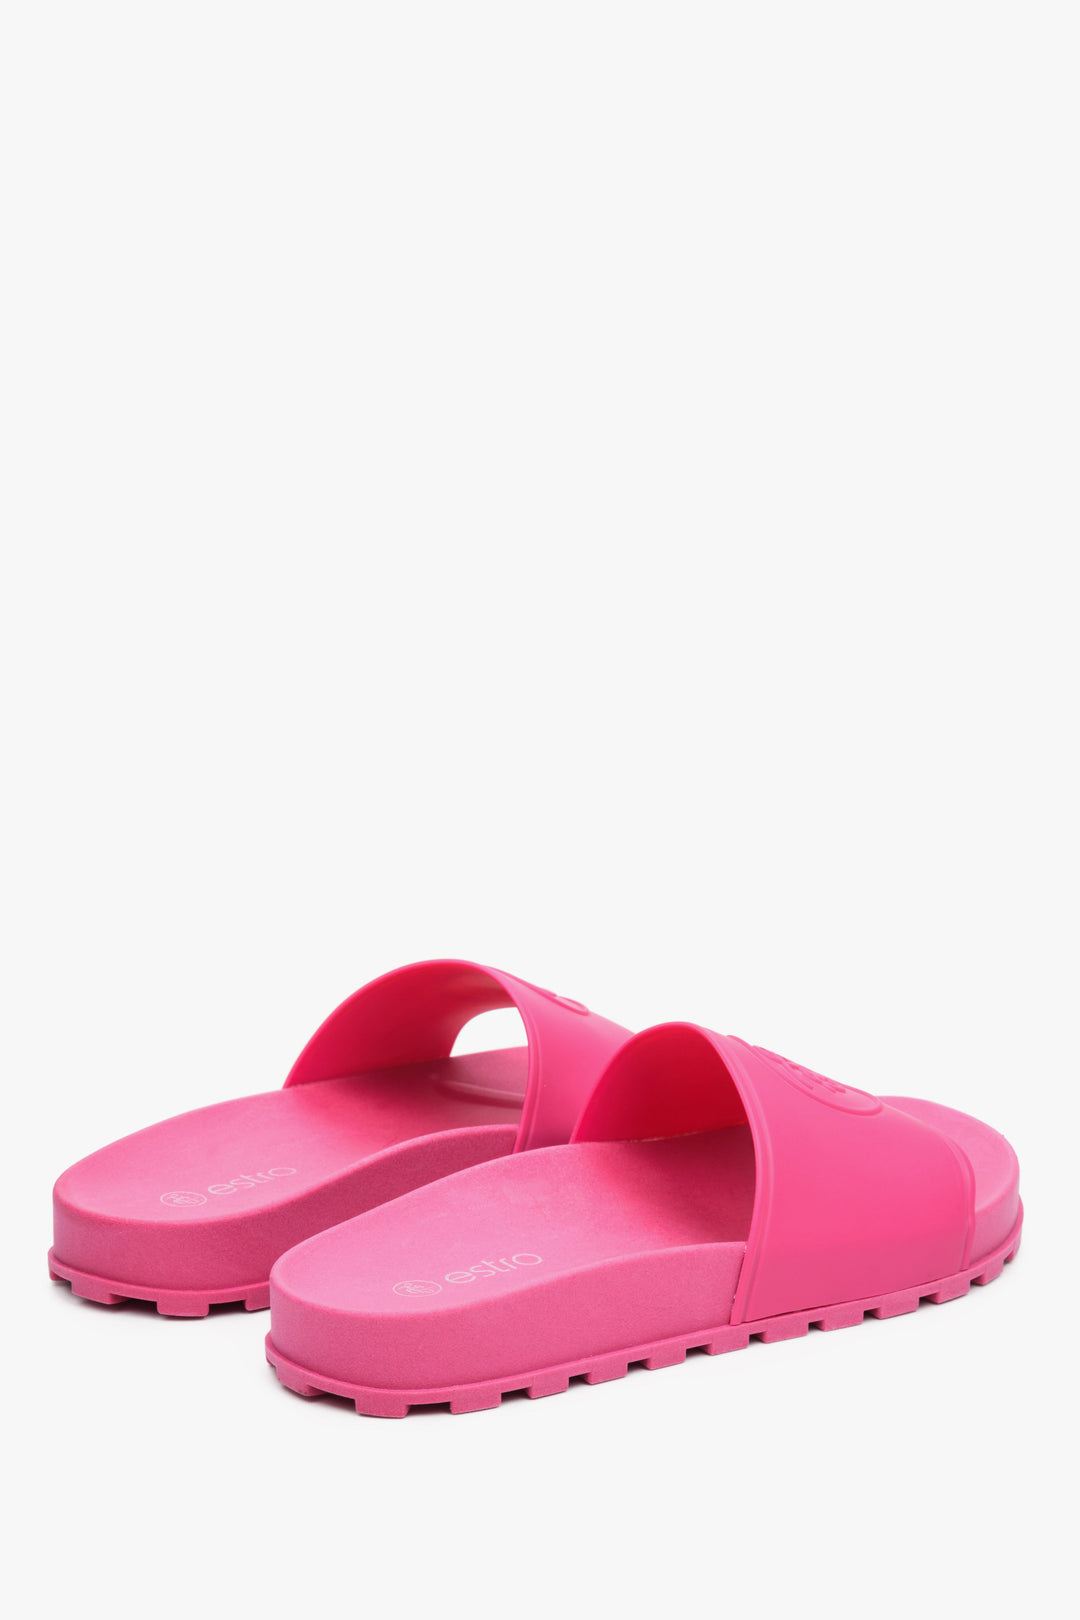 Women's pink rubber flip-flops for fall/spring by Estro.